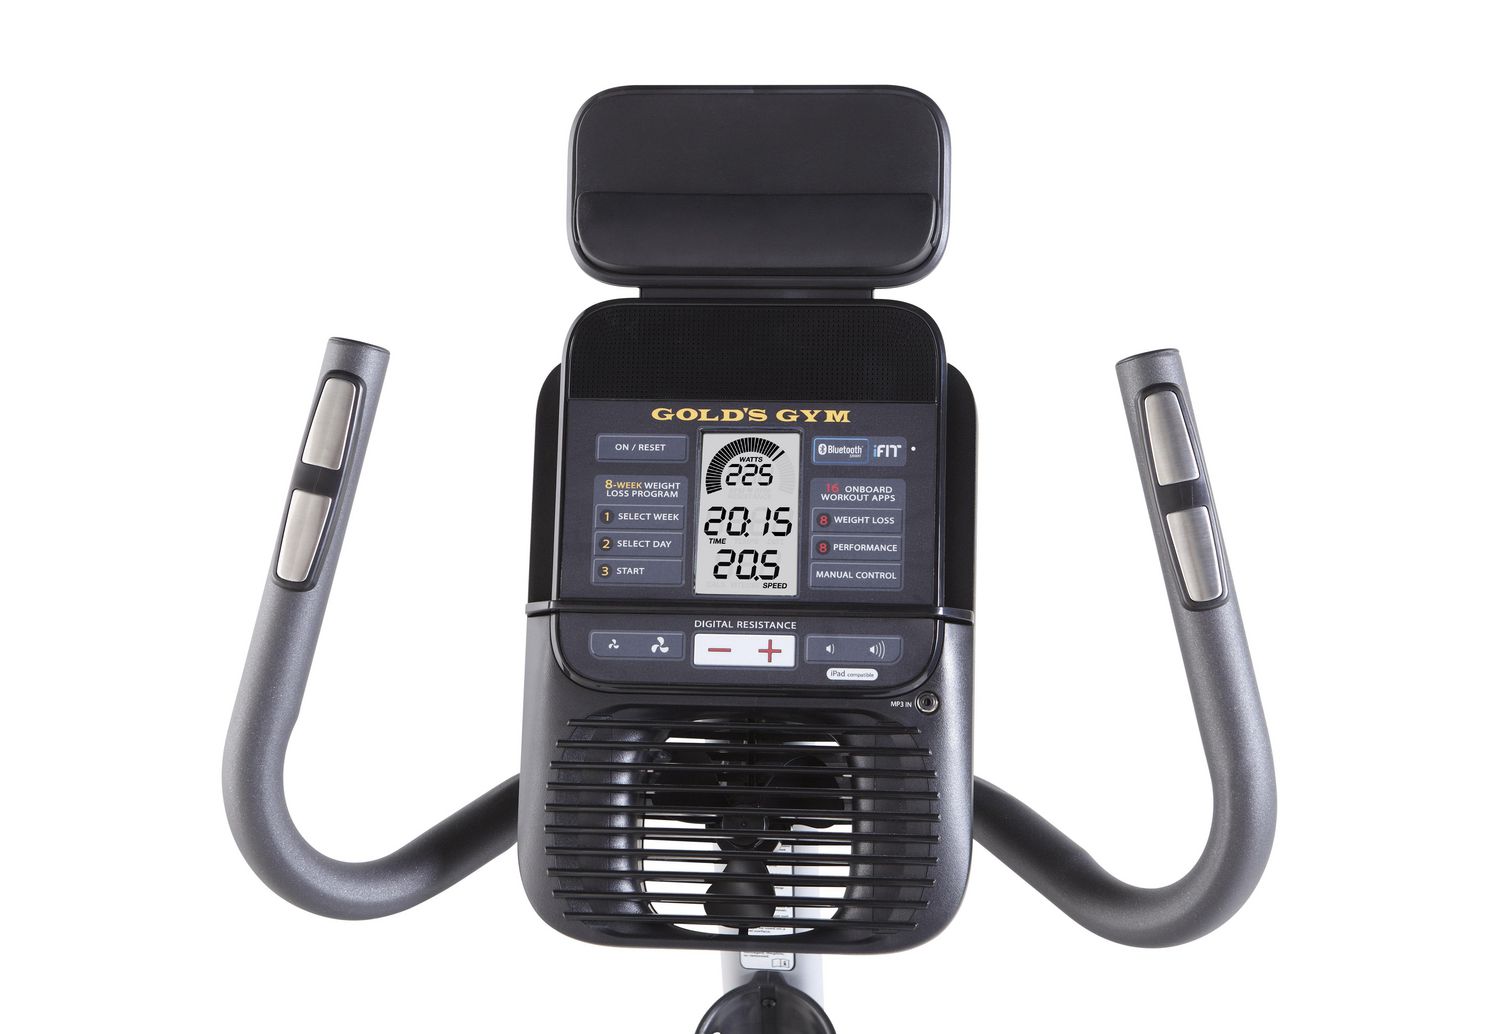 Gold Gym Cycle 300C Manual - Amazon Com Gold S Gym Cycle Trainer 300c